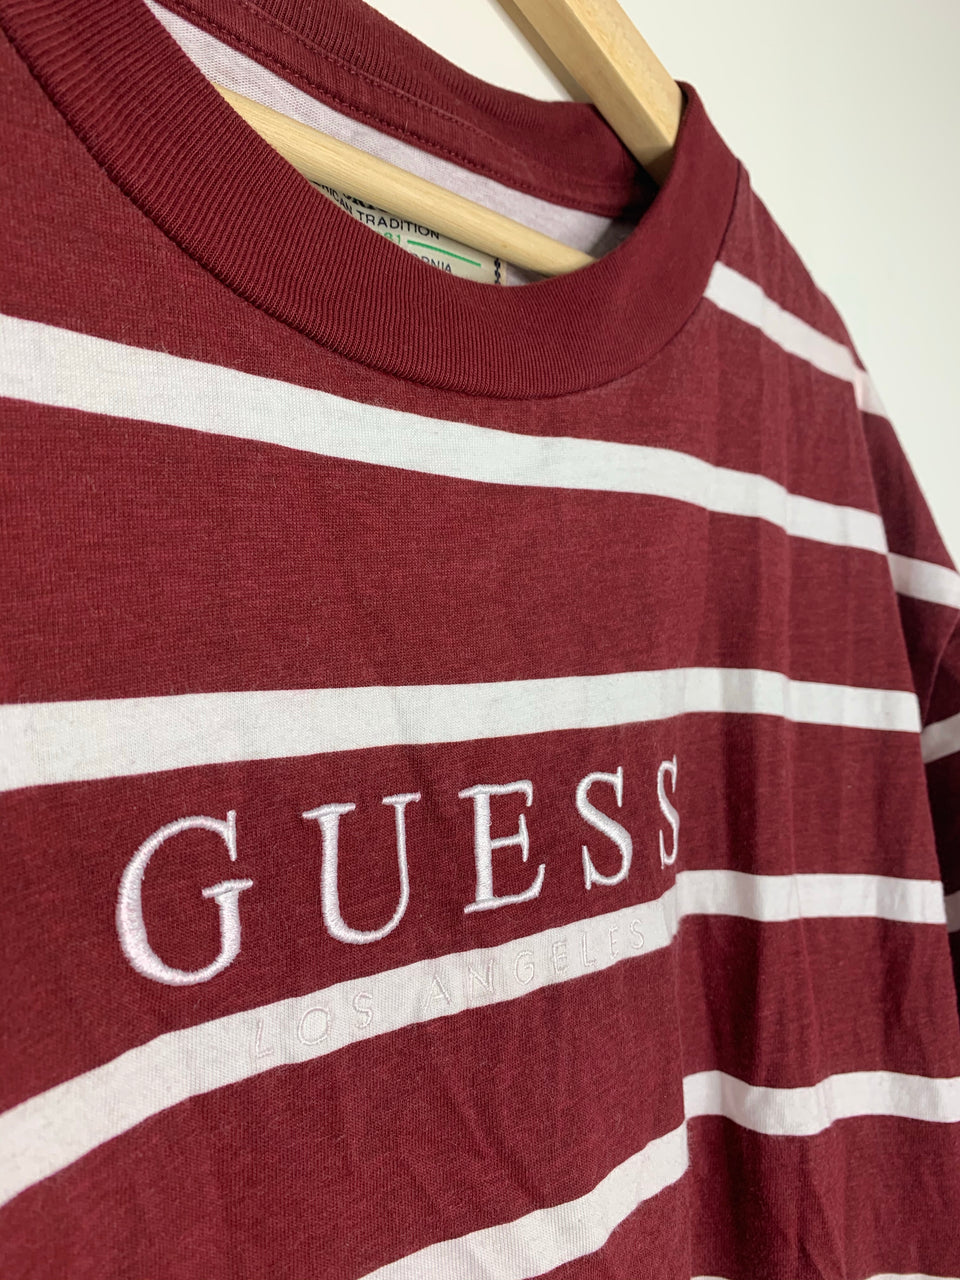 guess red and white striped t shirt